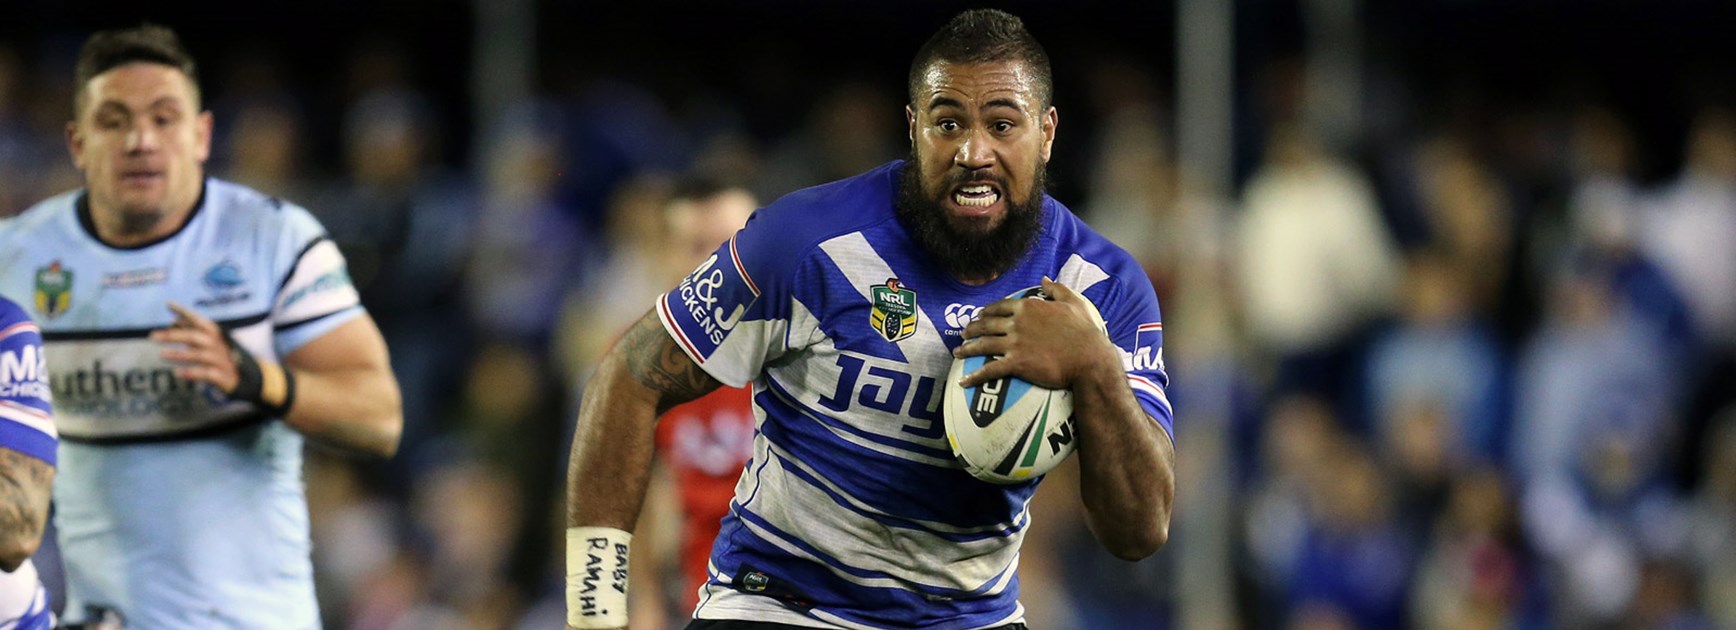 Experienced Bulldogs forward Frank Pritchard will depart the club at season's end.